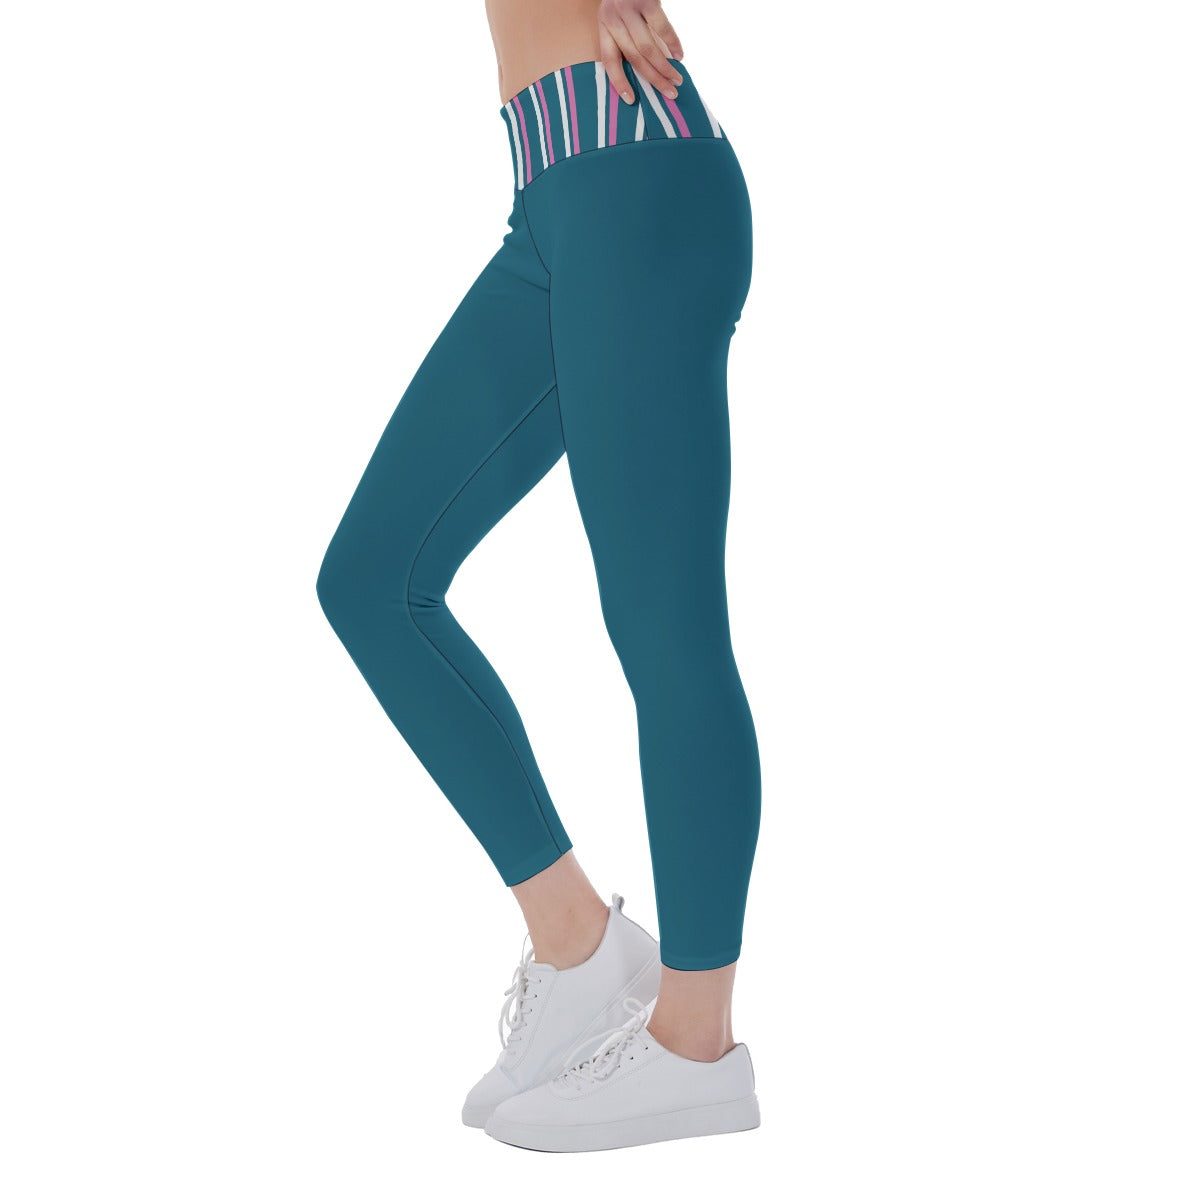 Coming Up Daisies - Peacock/Pink - Stripes - Women's Pickleball Leggings - Mid-Fit - by Dizzy Pickle